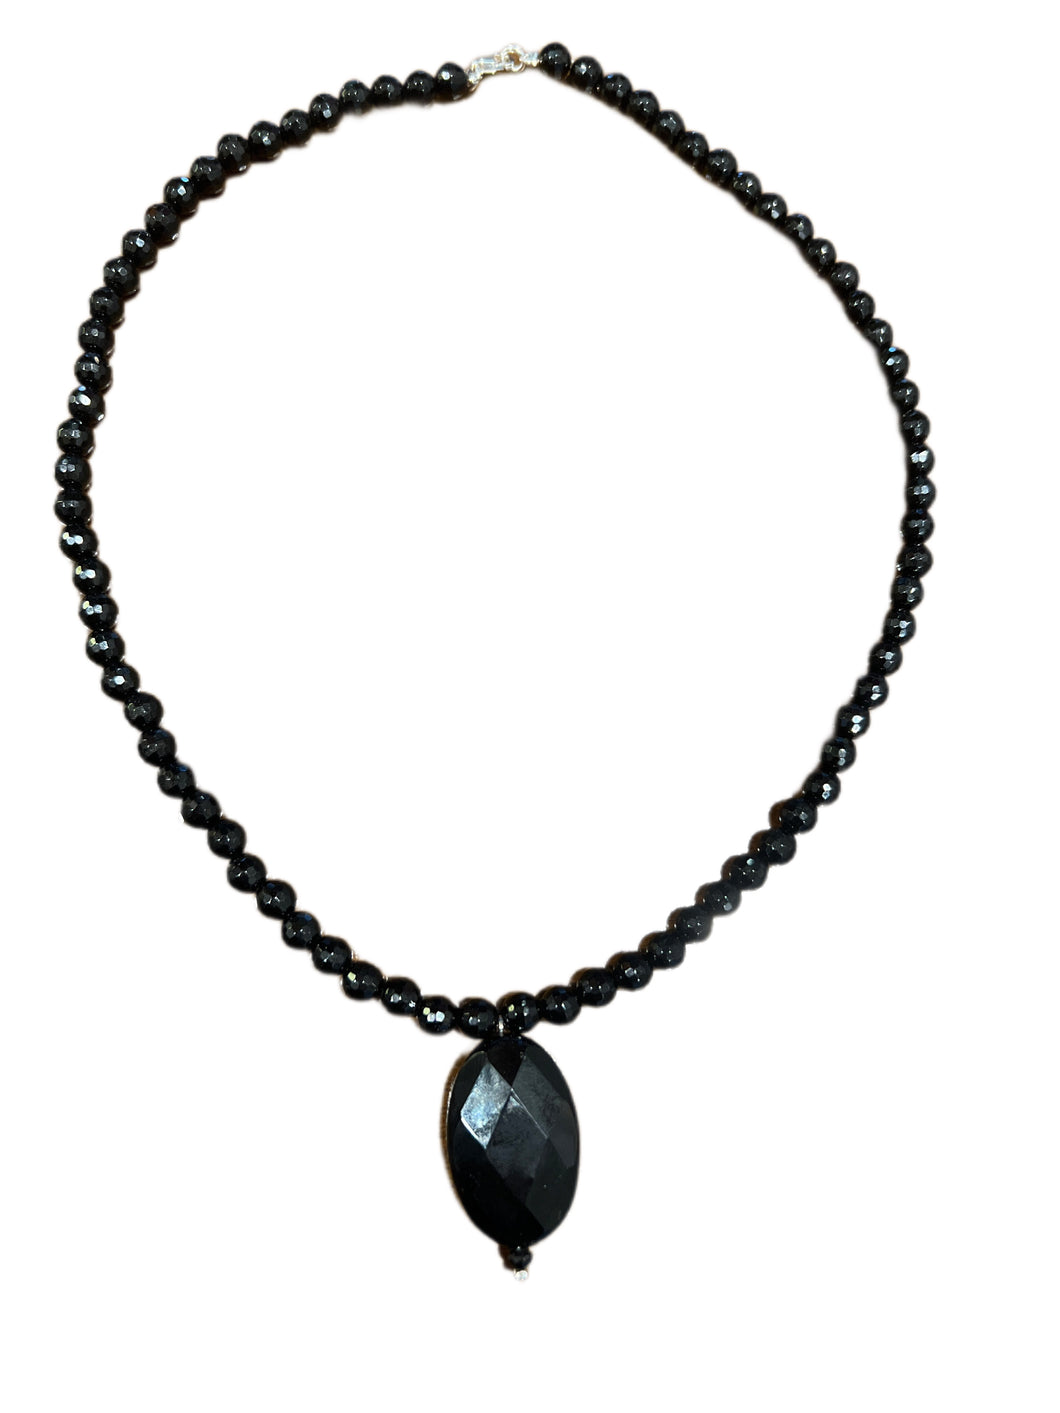 Onyx faceted pendant Necklace